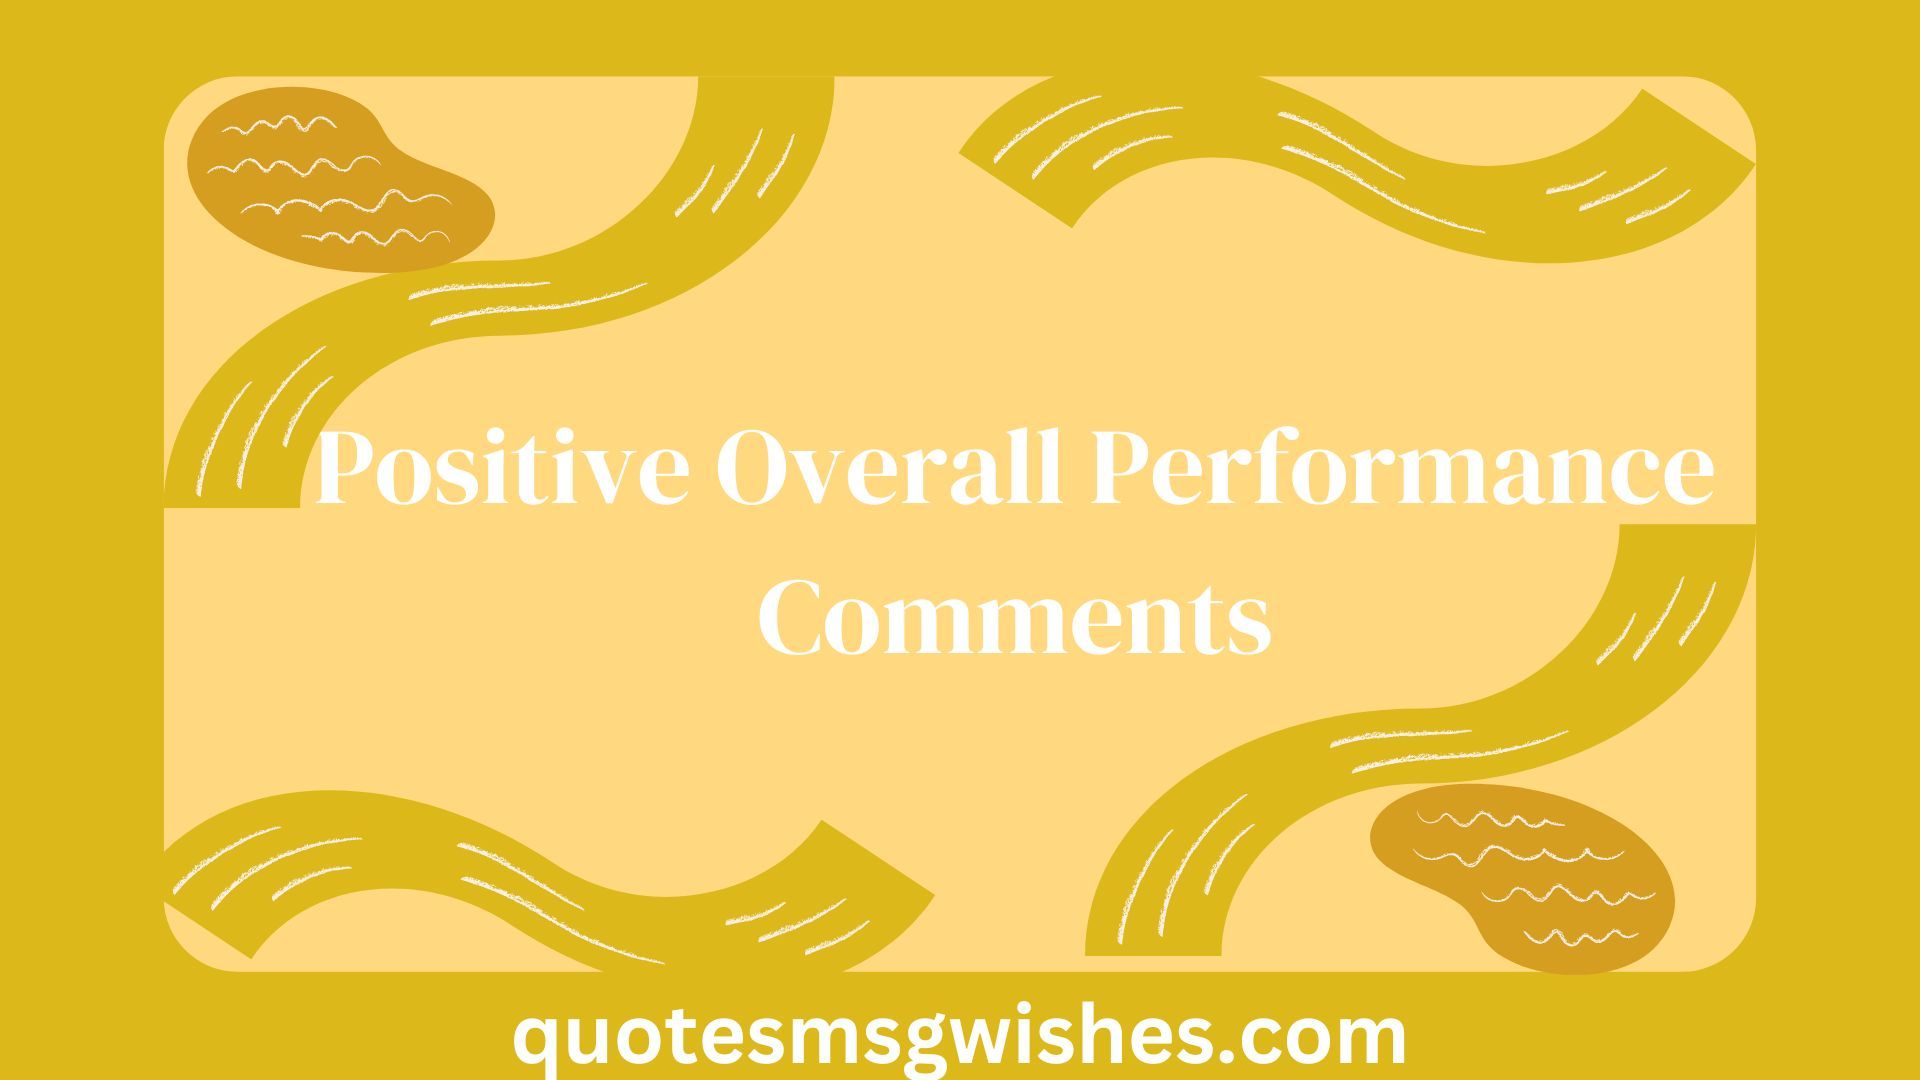 Positive Overall Performance Comments